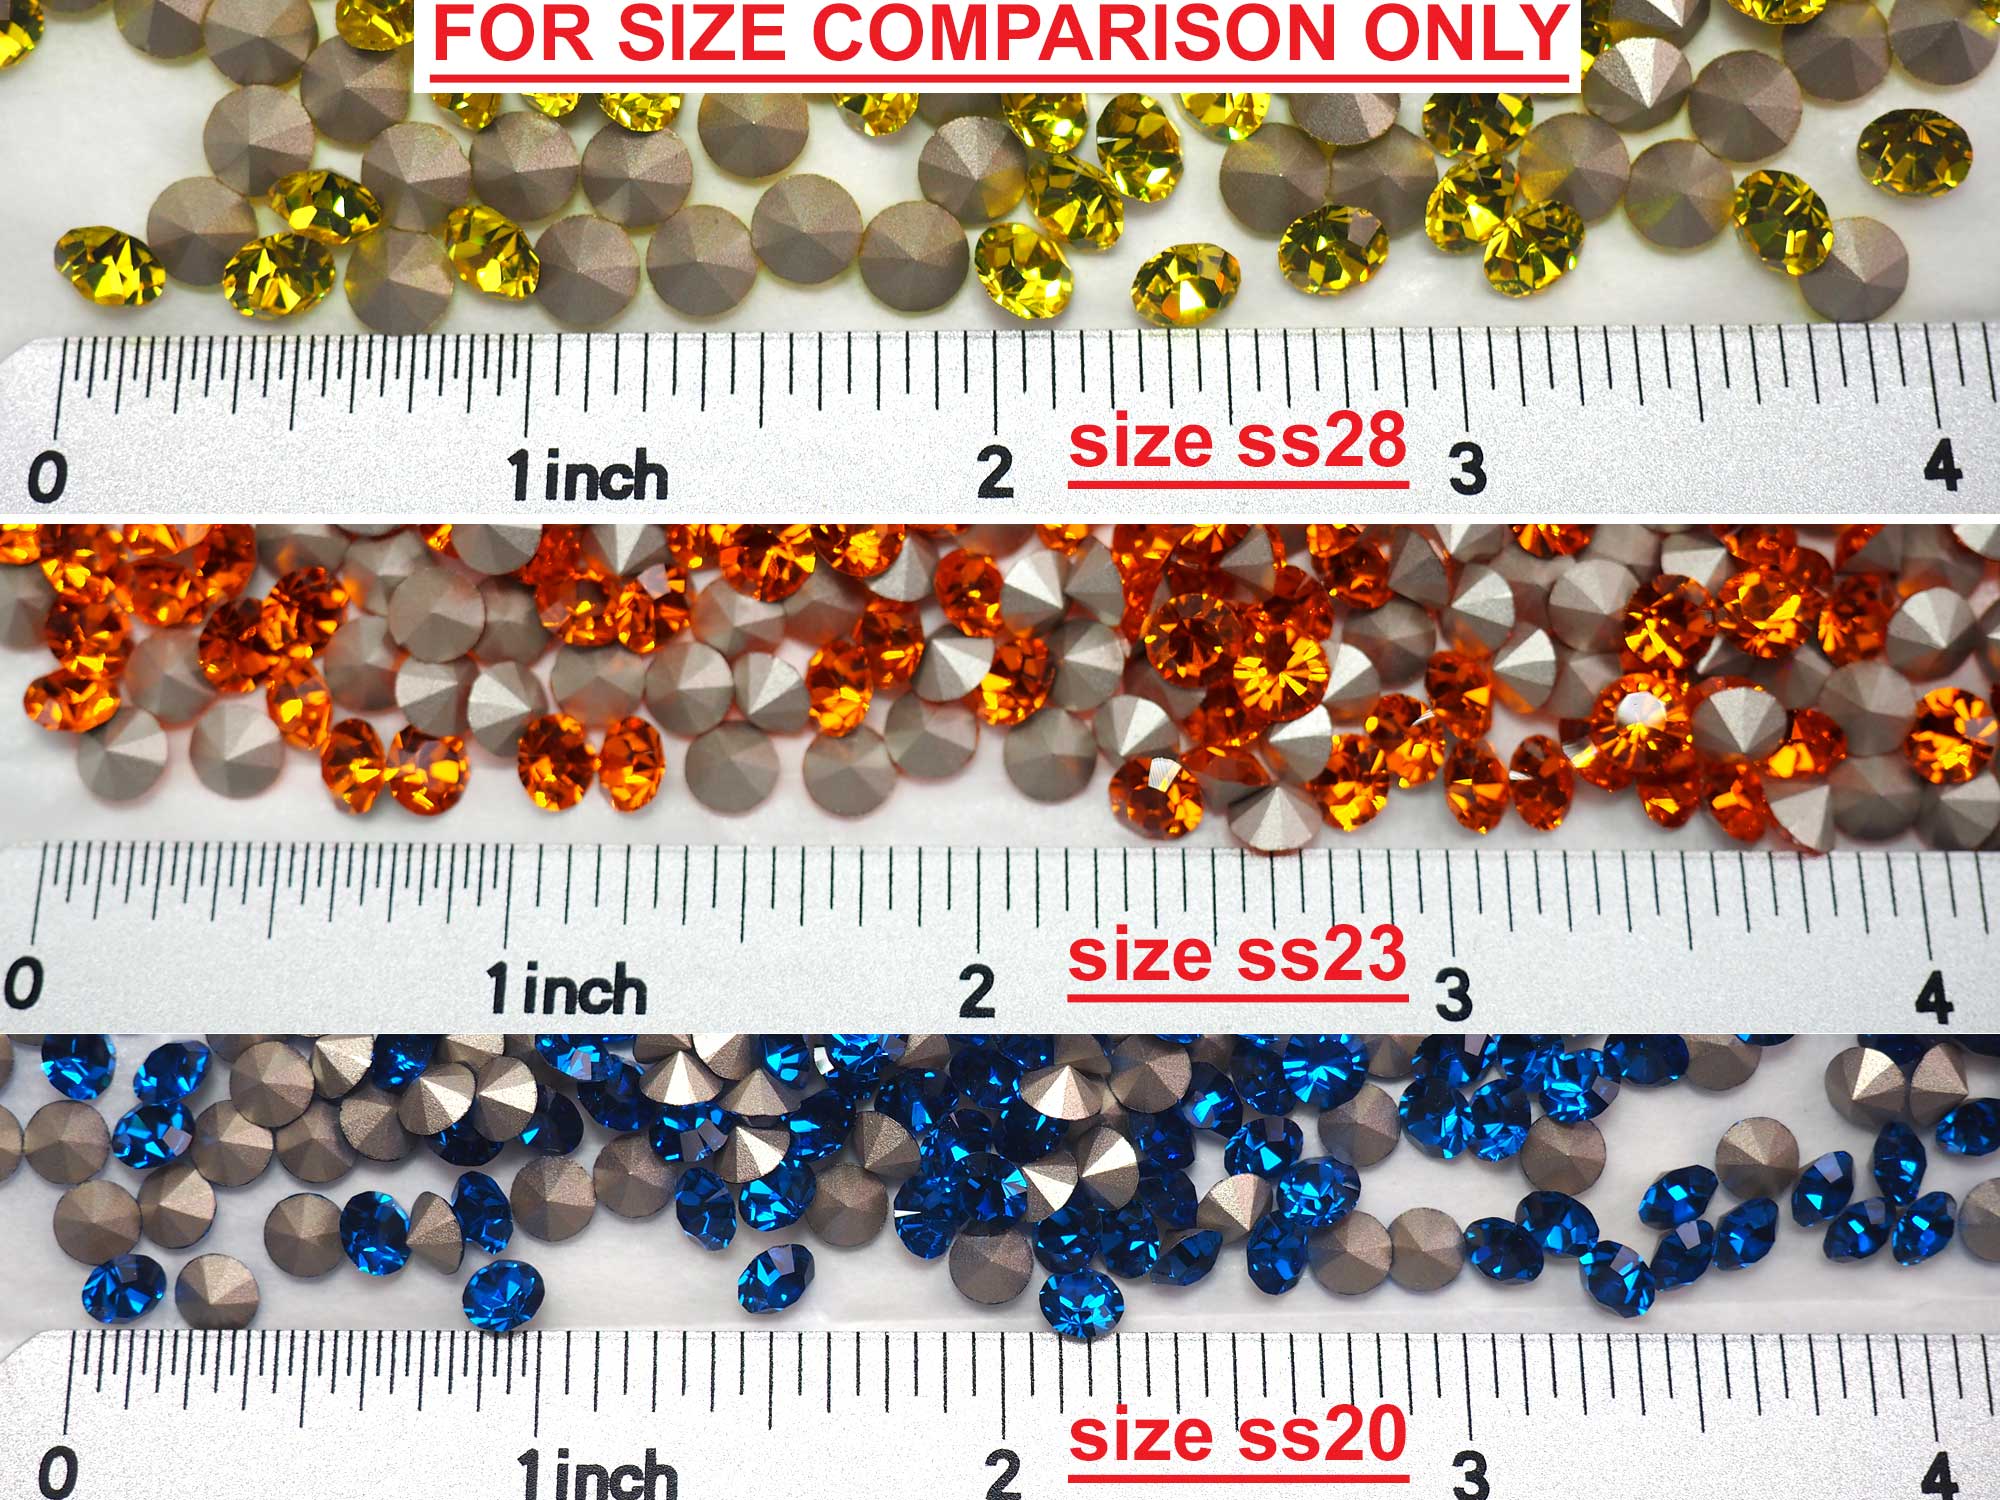 Citrine, Preciosa Genuine Czech MAXIMA Pointed Back Chatons in size ss28 (6mm, 0.24inch), 36 pieces, Silver Foiled, P631